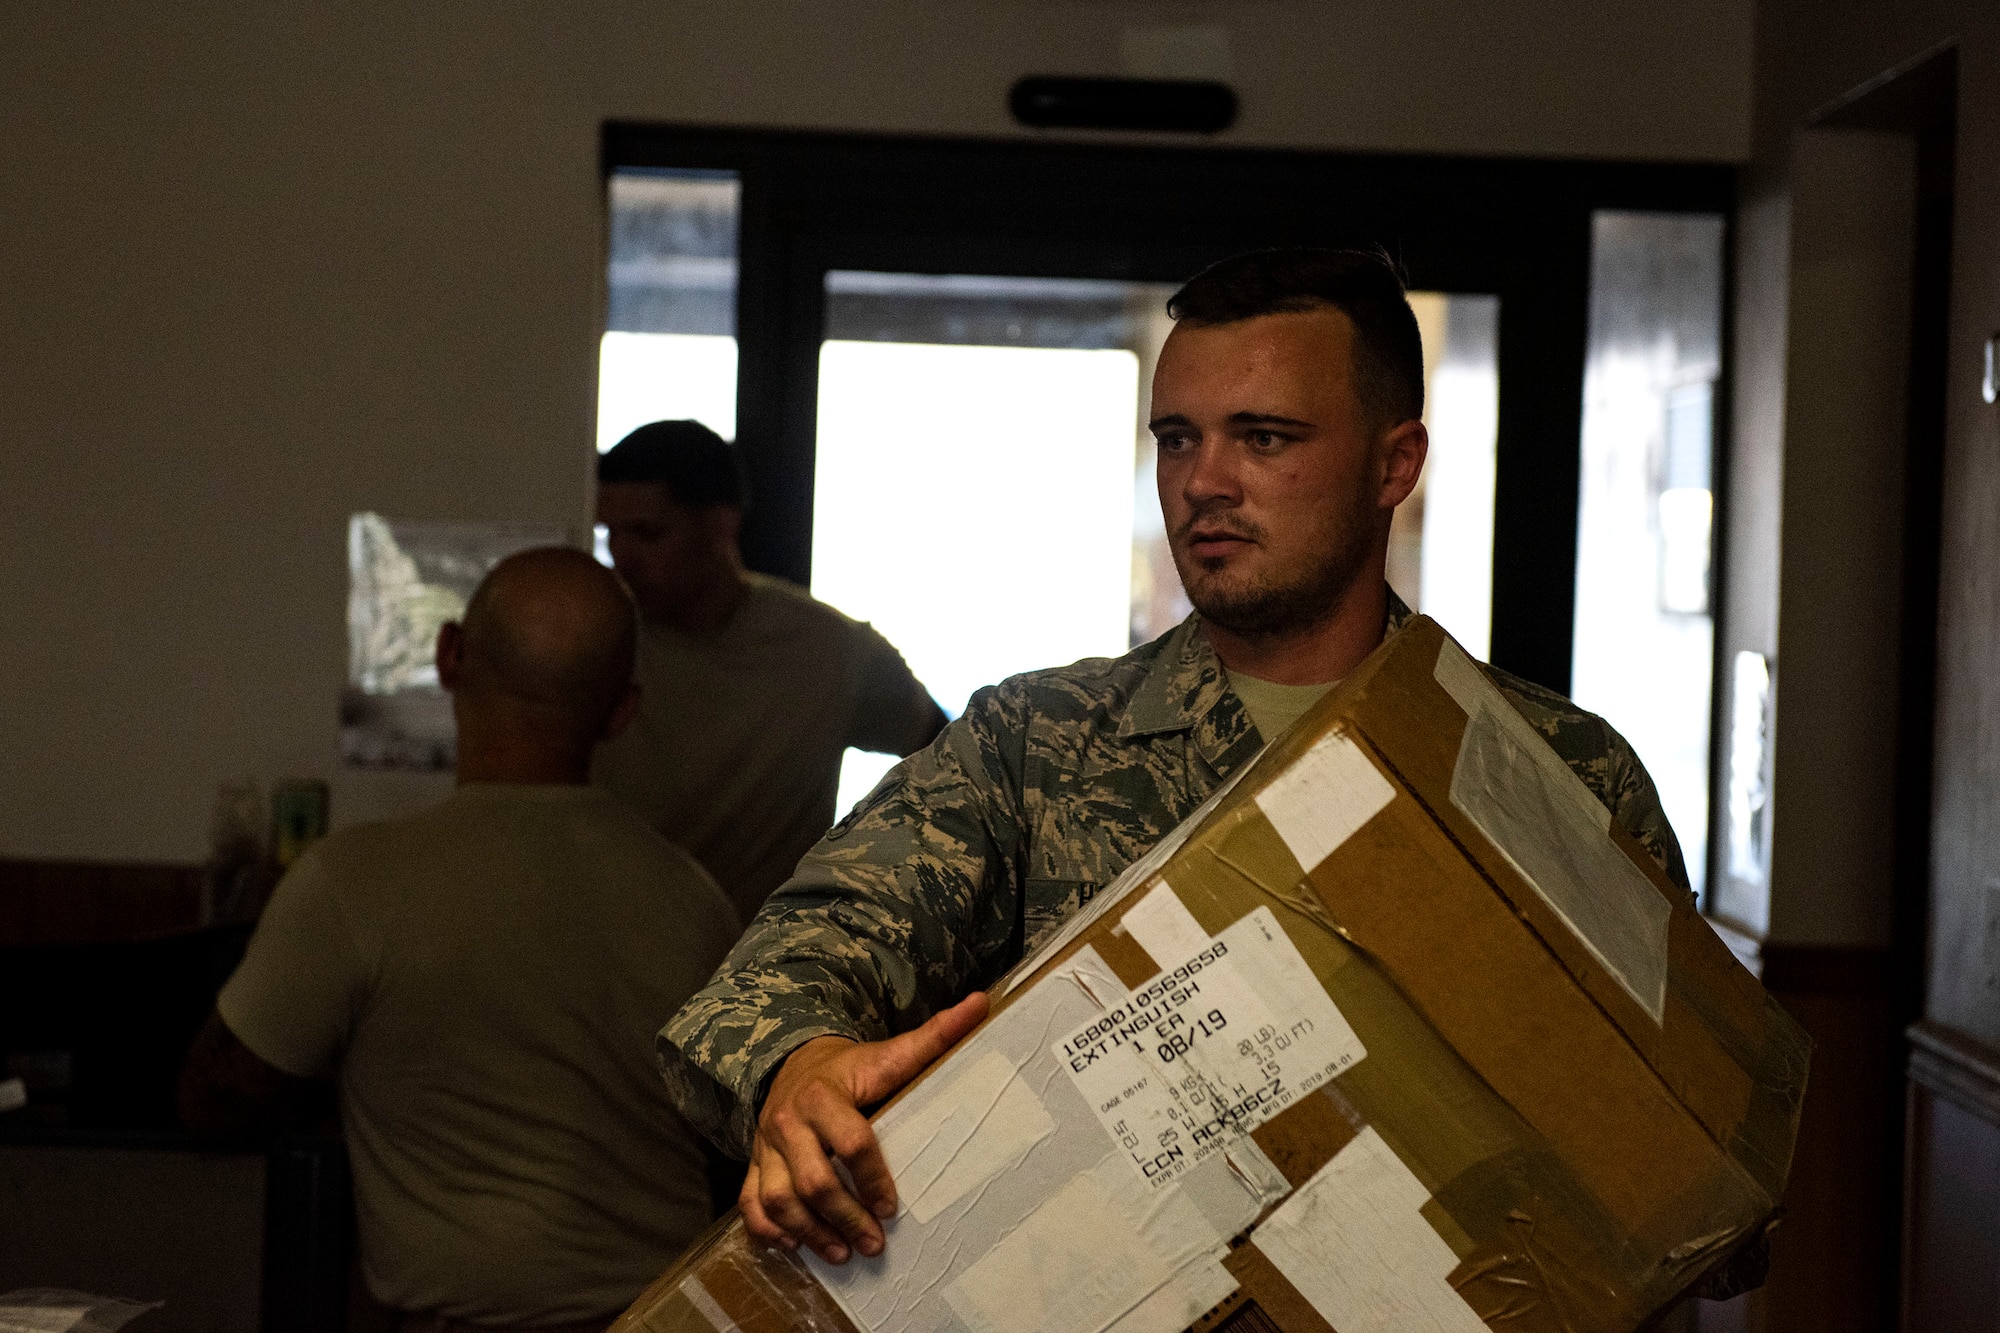 Airman 1st Class Timothy Hankins, 23d Logistics Readiness Squadron documented cargo operator, delivers cargo during a cargo sweep Aug. 13, 2019, at Moody Air Force Base, Ga. The documented cargo section is responsible for transporting mission-critical equipment and material to squadrons across the base, which helps facilitate mission execution. (U.S. Air Force photo by Senior Airman Erick Requadt)